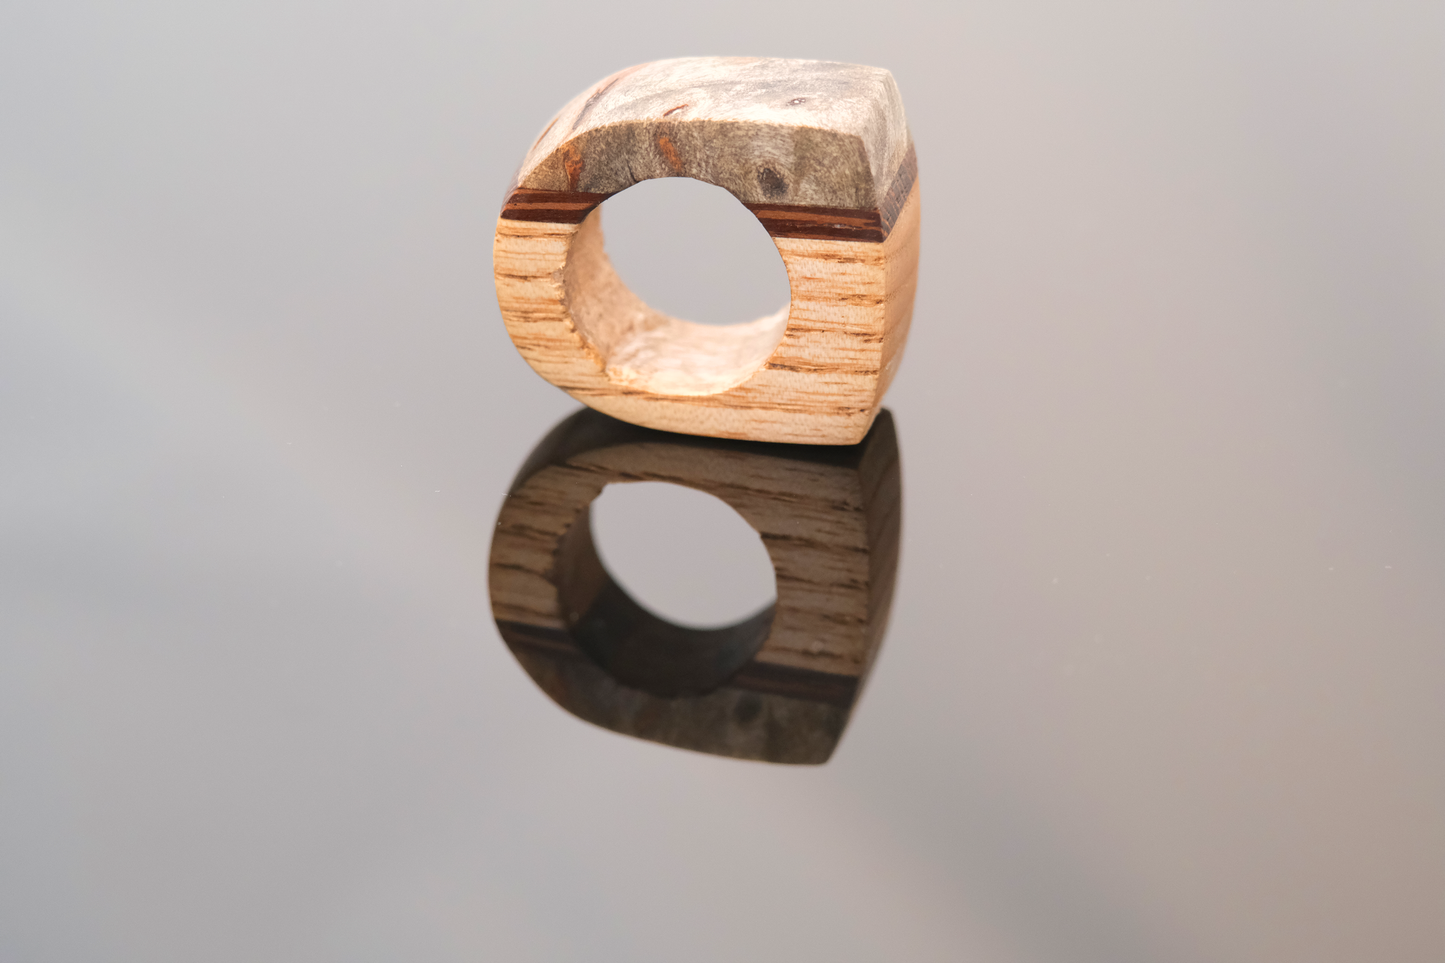 Stoned - Wenge and Maple Wood Ring - by Nicholas Howlett